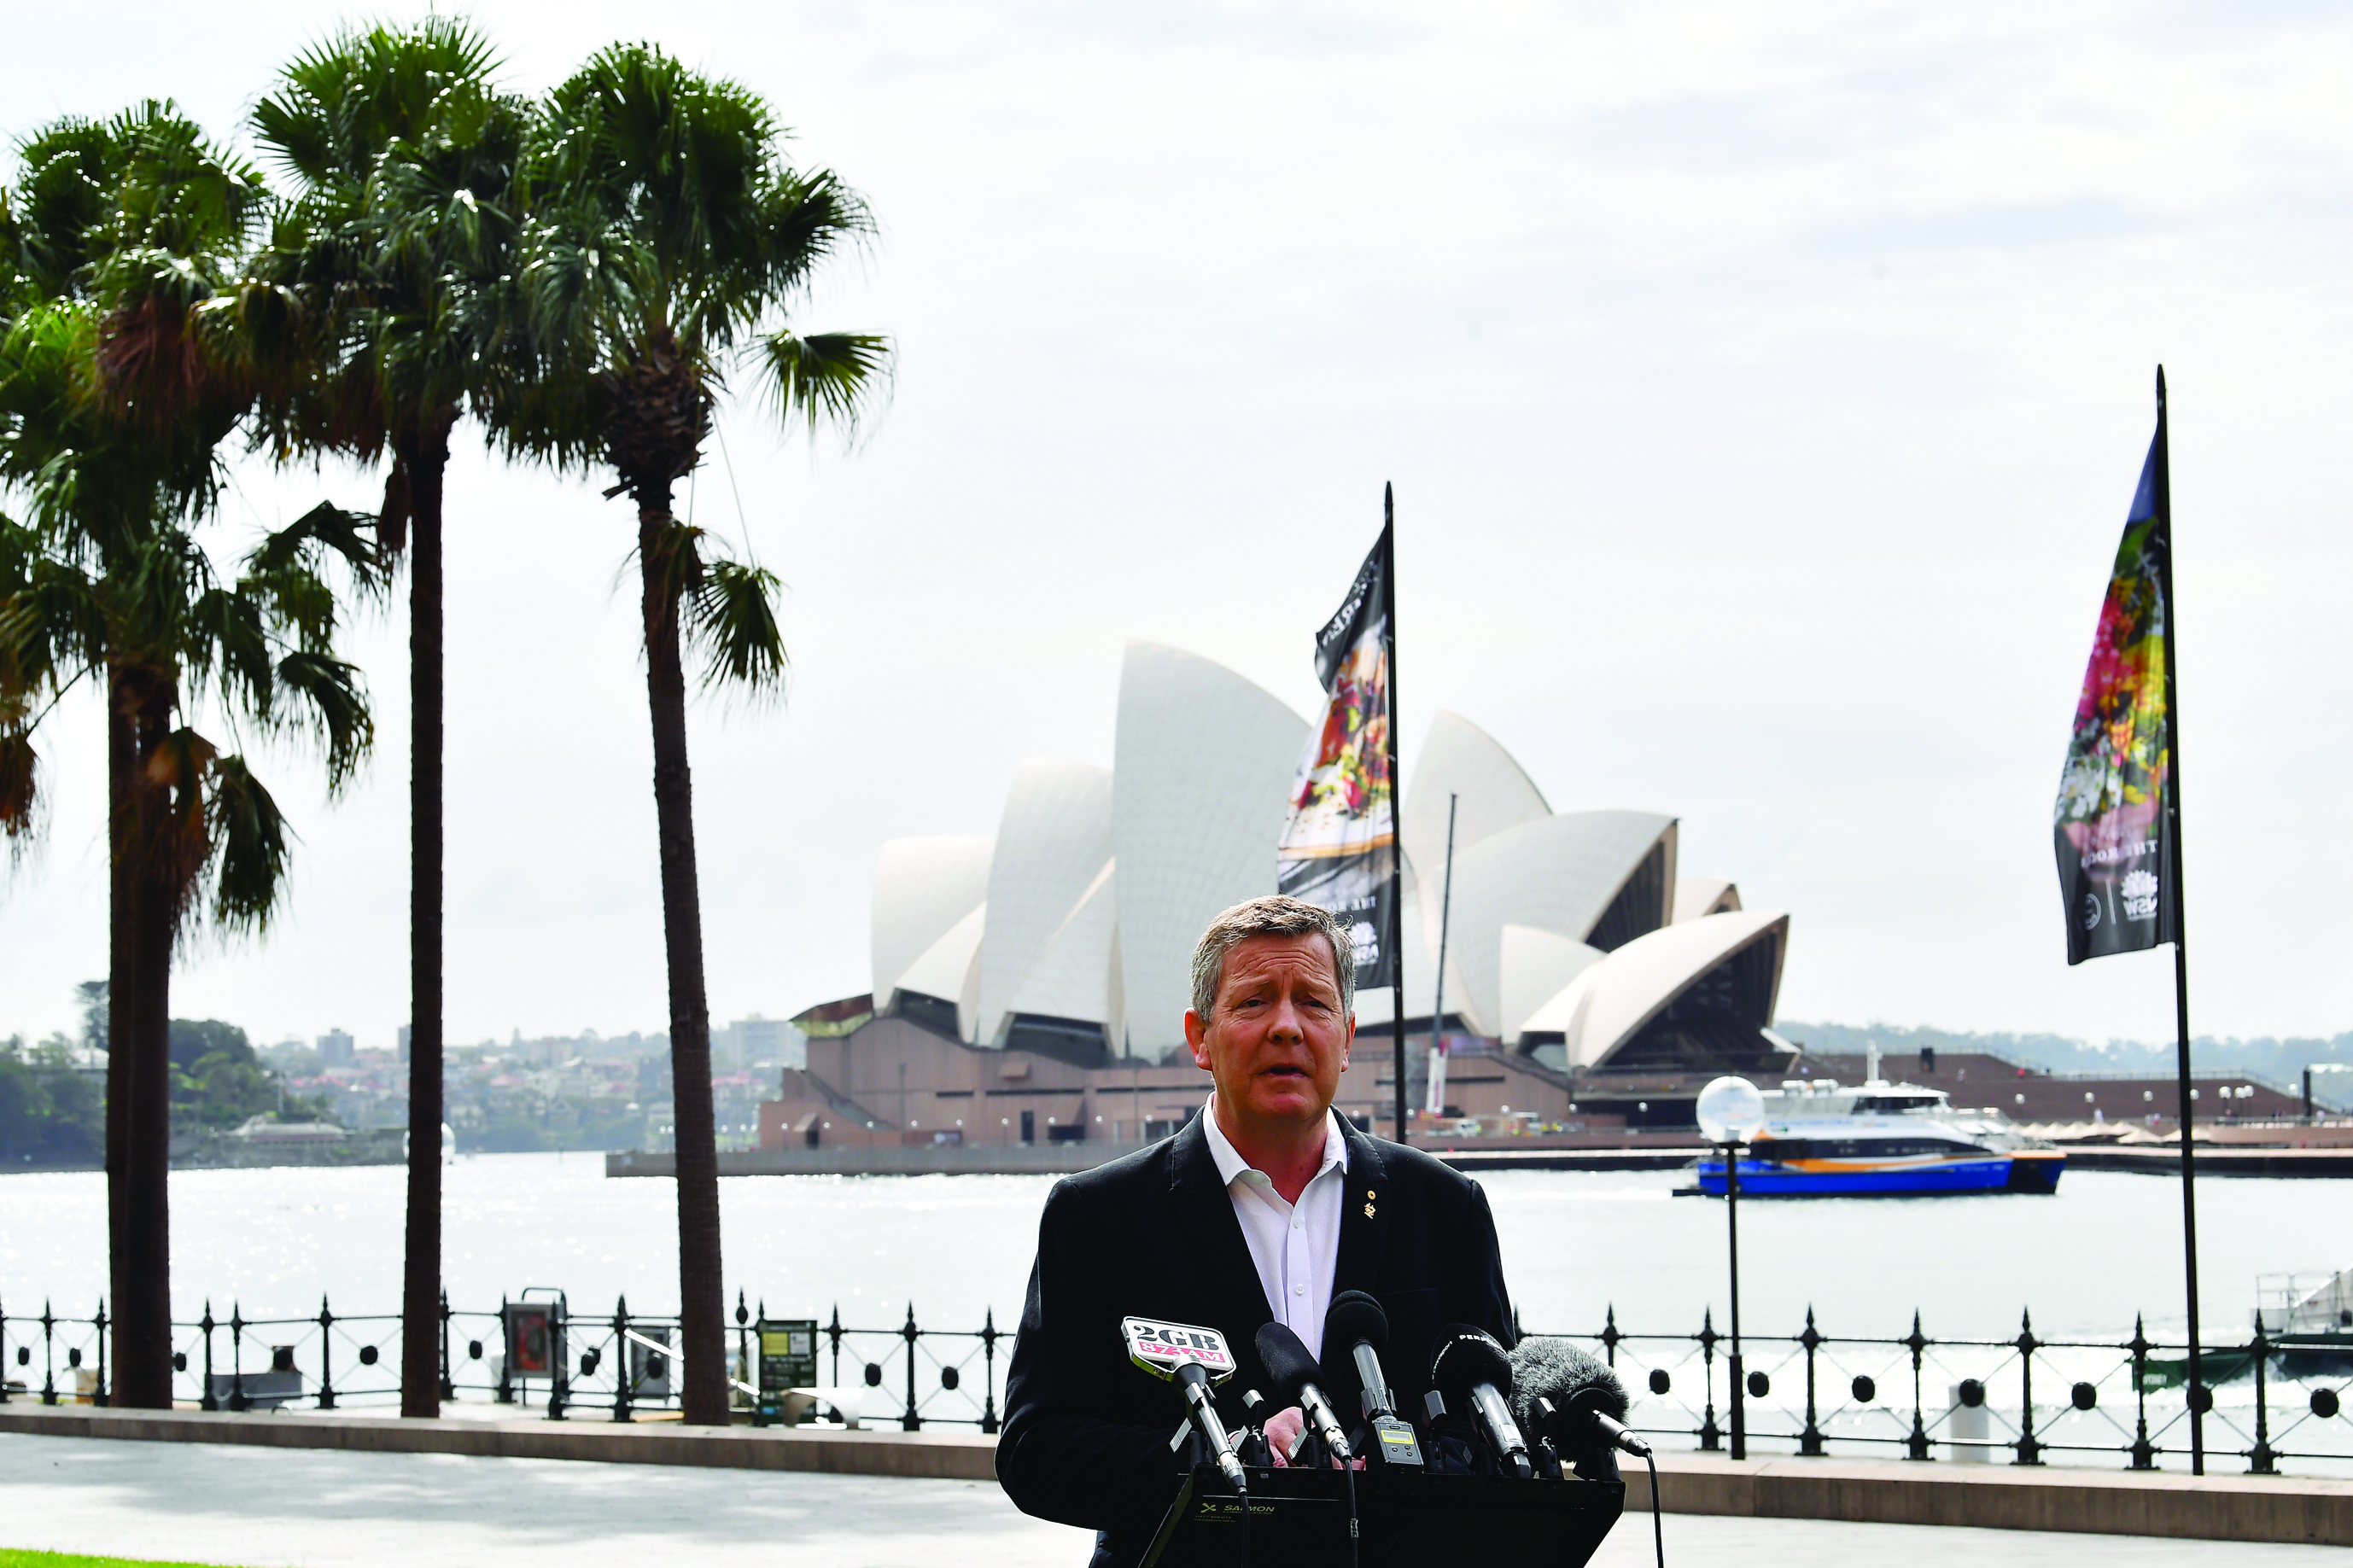 Australian Olympic Committee chief executive Matt Carroll speaks at a press conference at Circular Quay in Sydney on March 25, 2020, the morning after the historic decision to postpone the 2020 Tokyo Olympic Games. (Photo by SAEED KHAN / AFP) / -- IMAGE RESTRICTED TO EDITORIAL USE - STRICTLY NO COMMERCIAL USE --